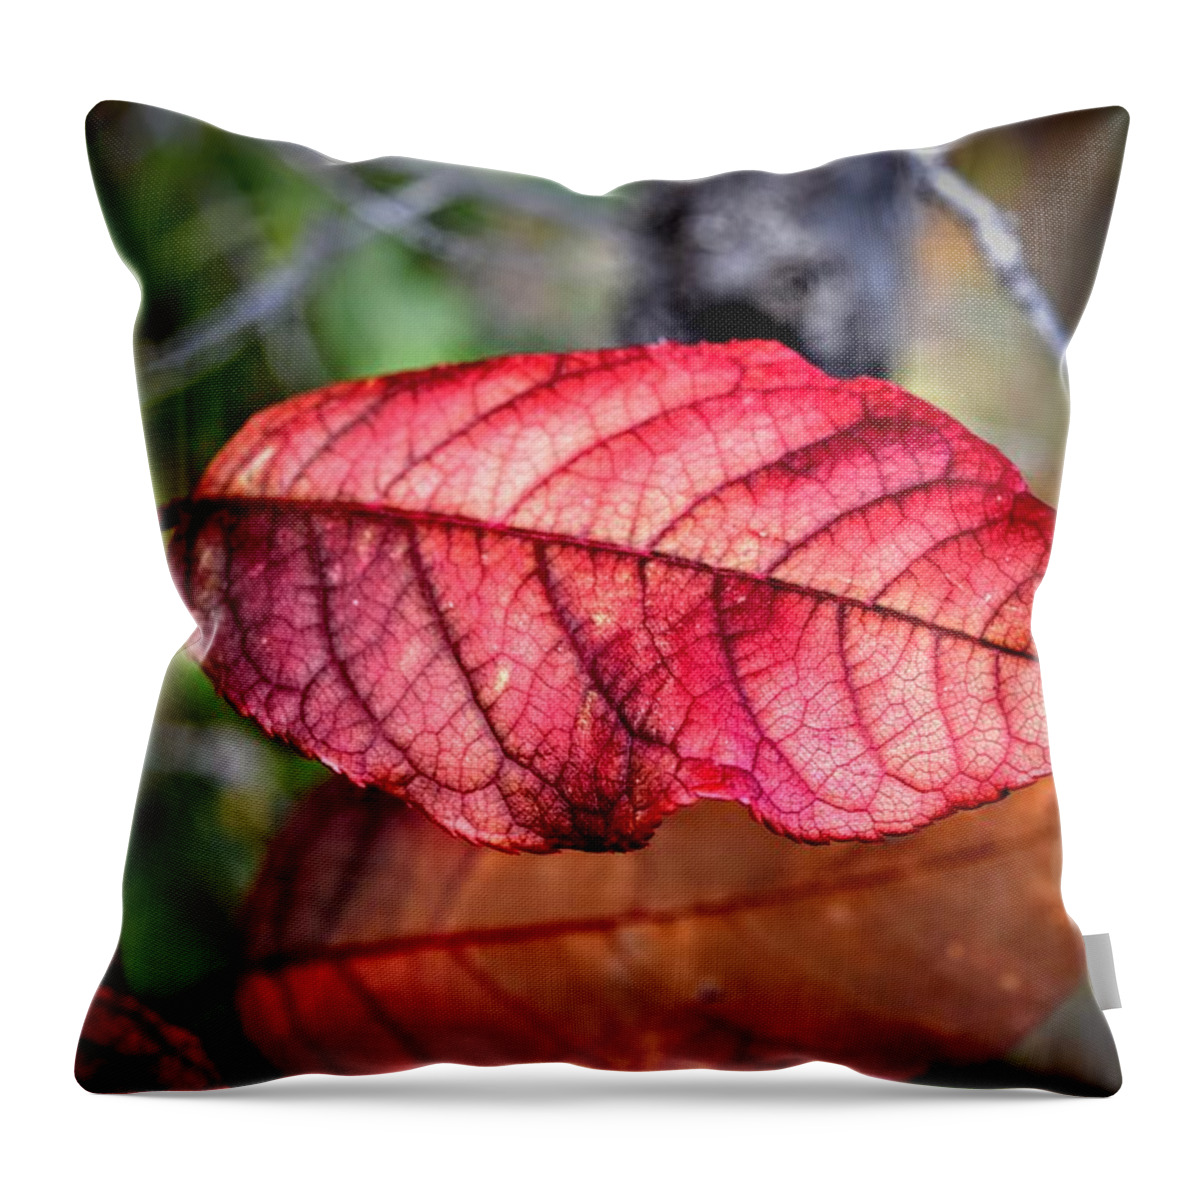 Autumn Throw Pillow featuring the photograph Autumn Red by Michael Brungardt